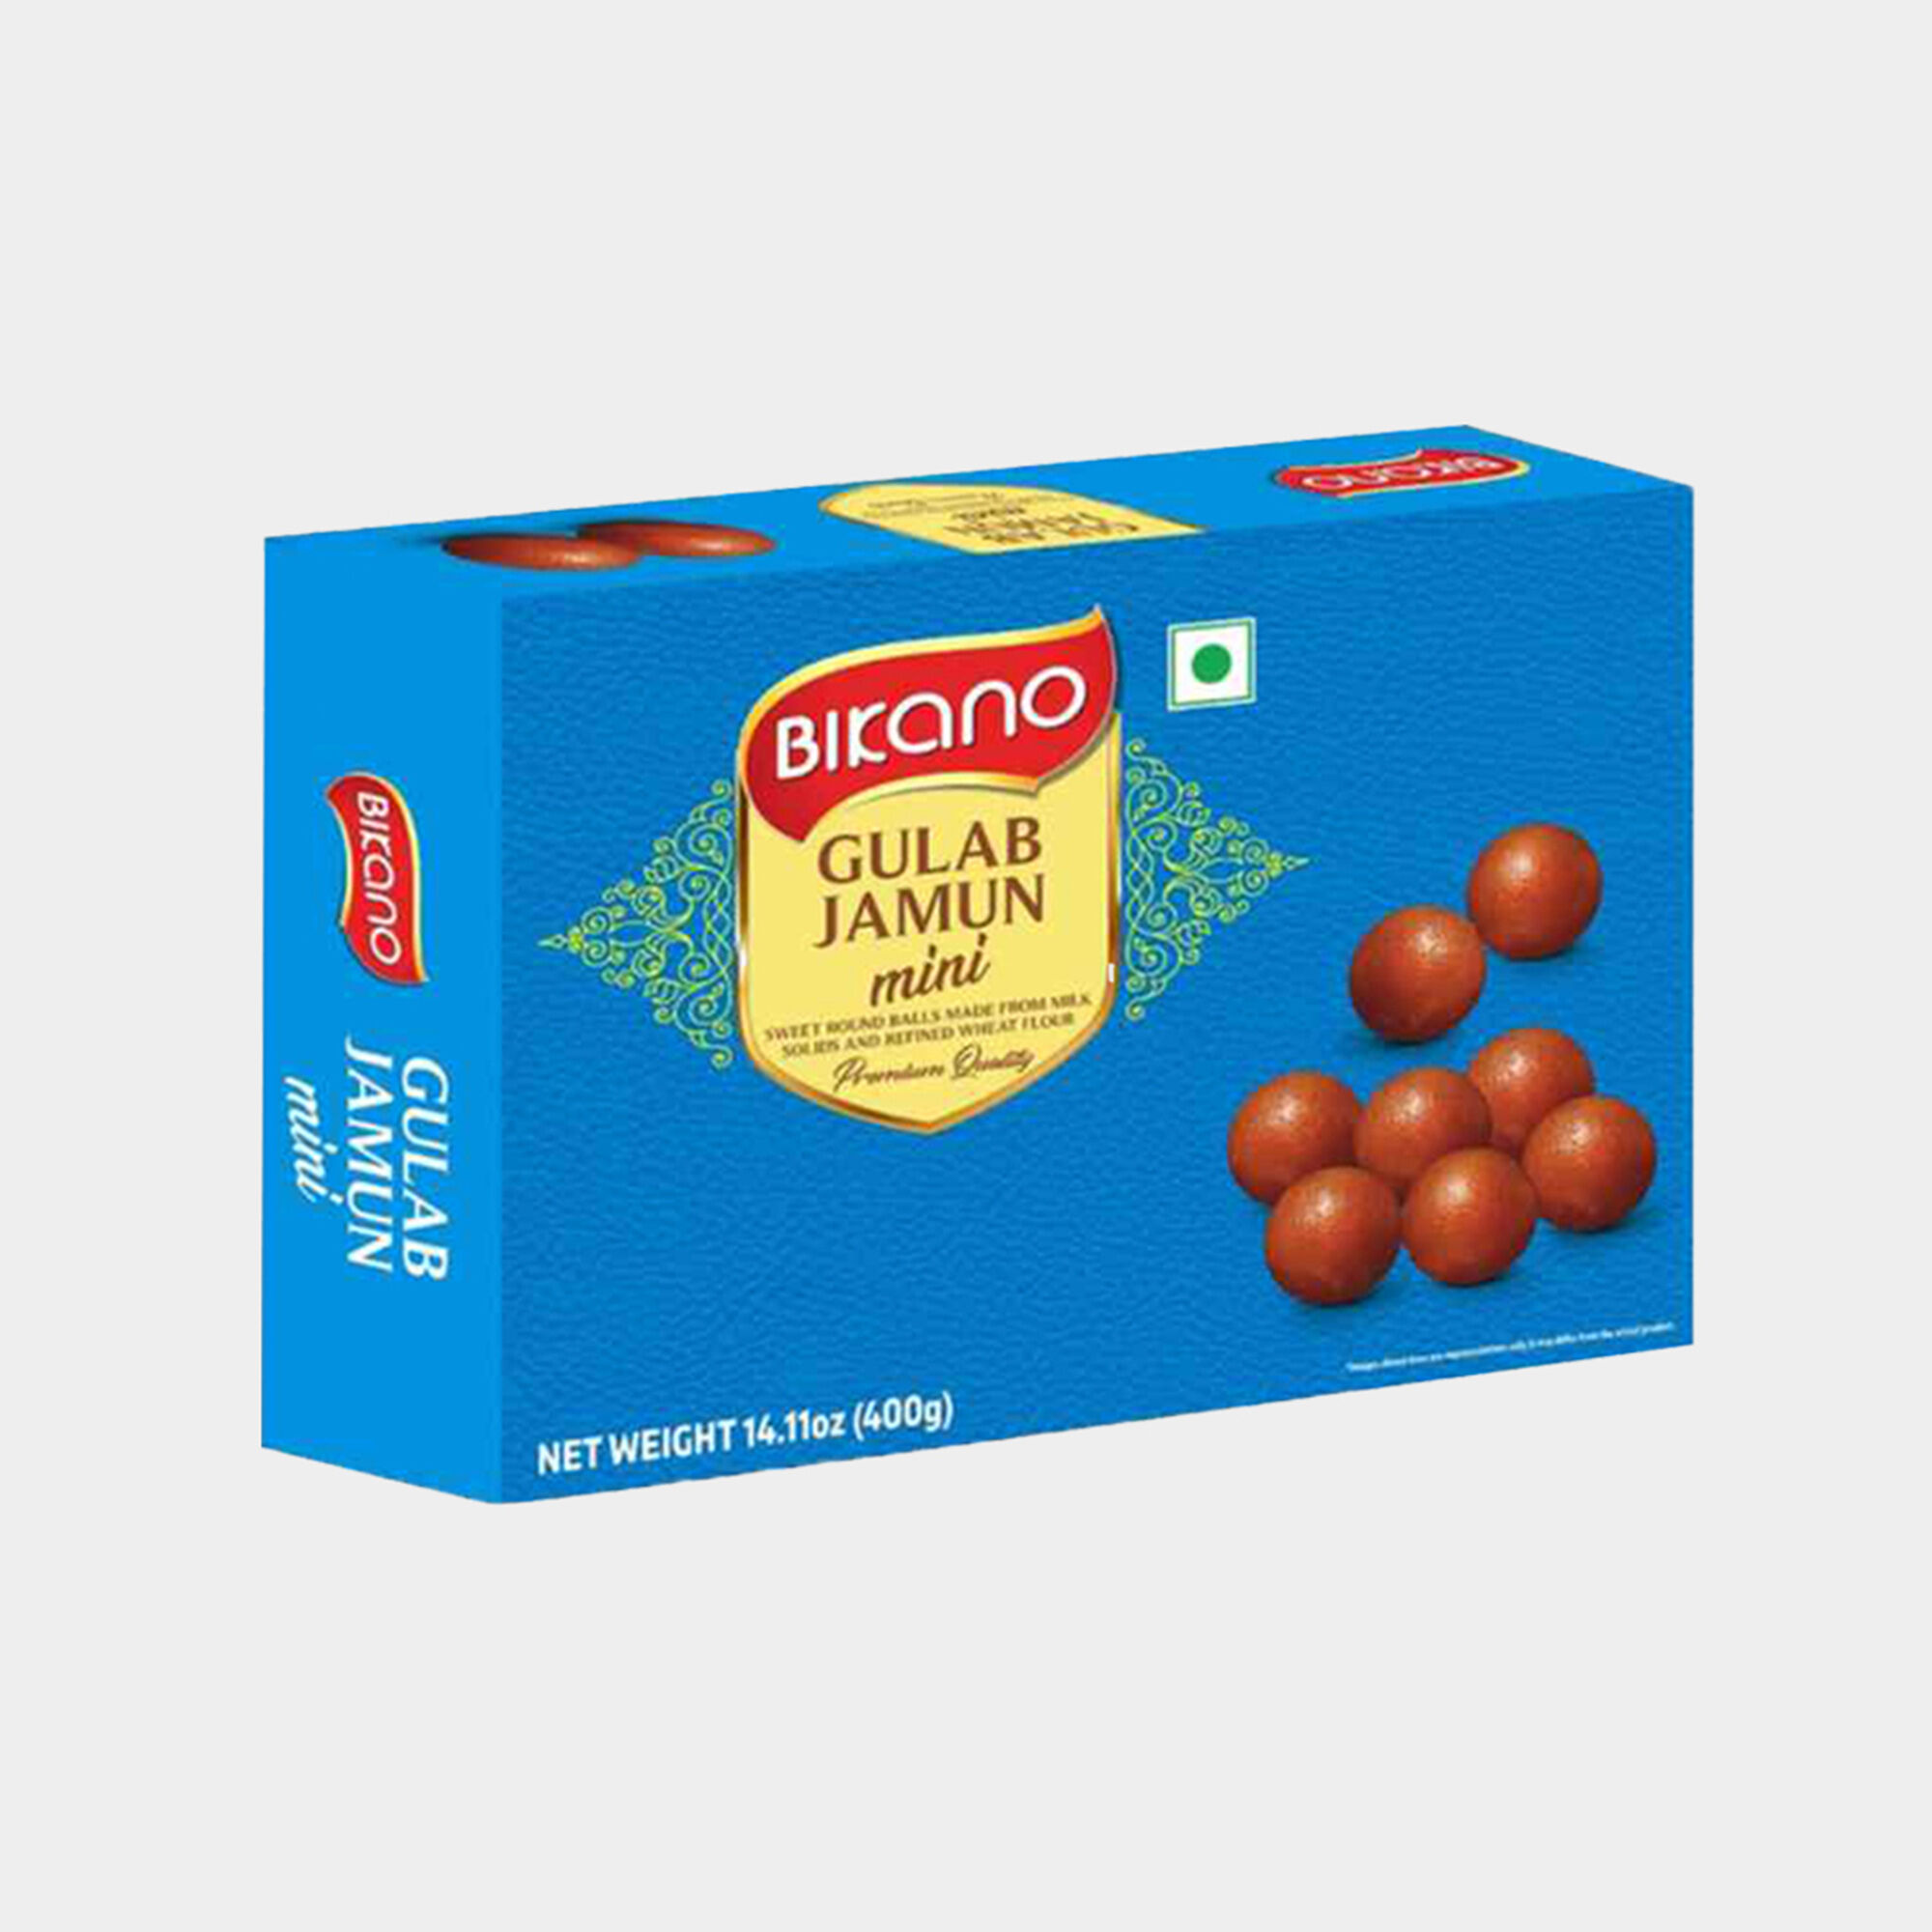 Bikano launches a plethora of gift packs ahead of Diwali